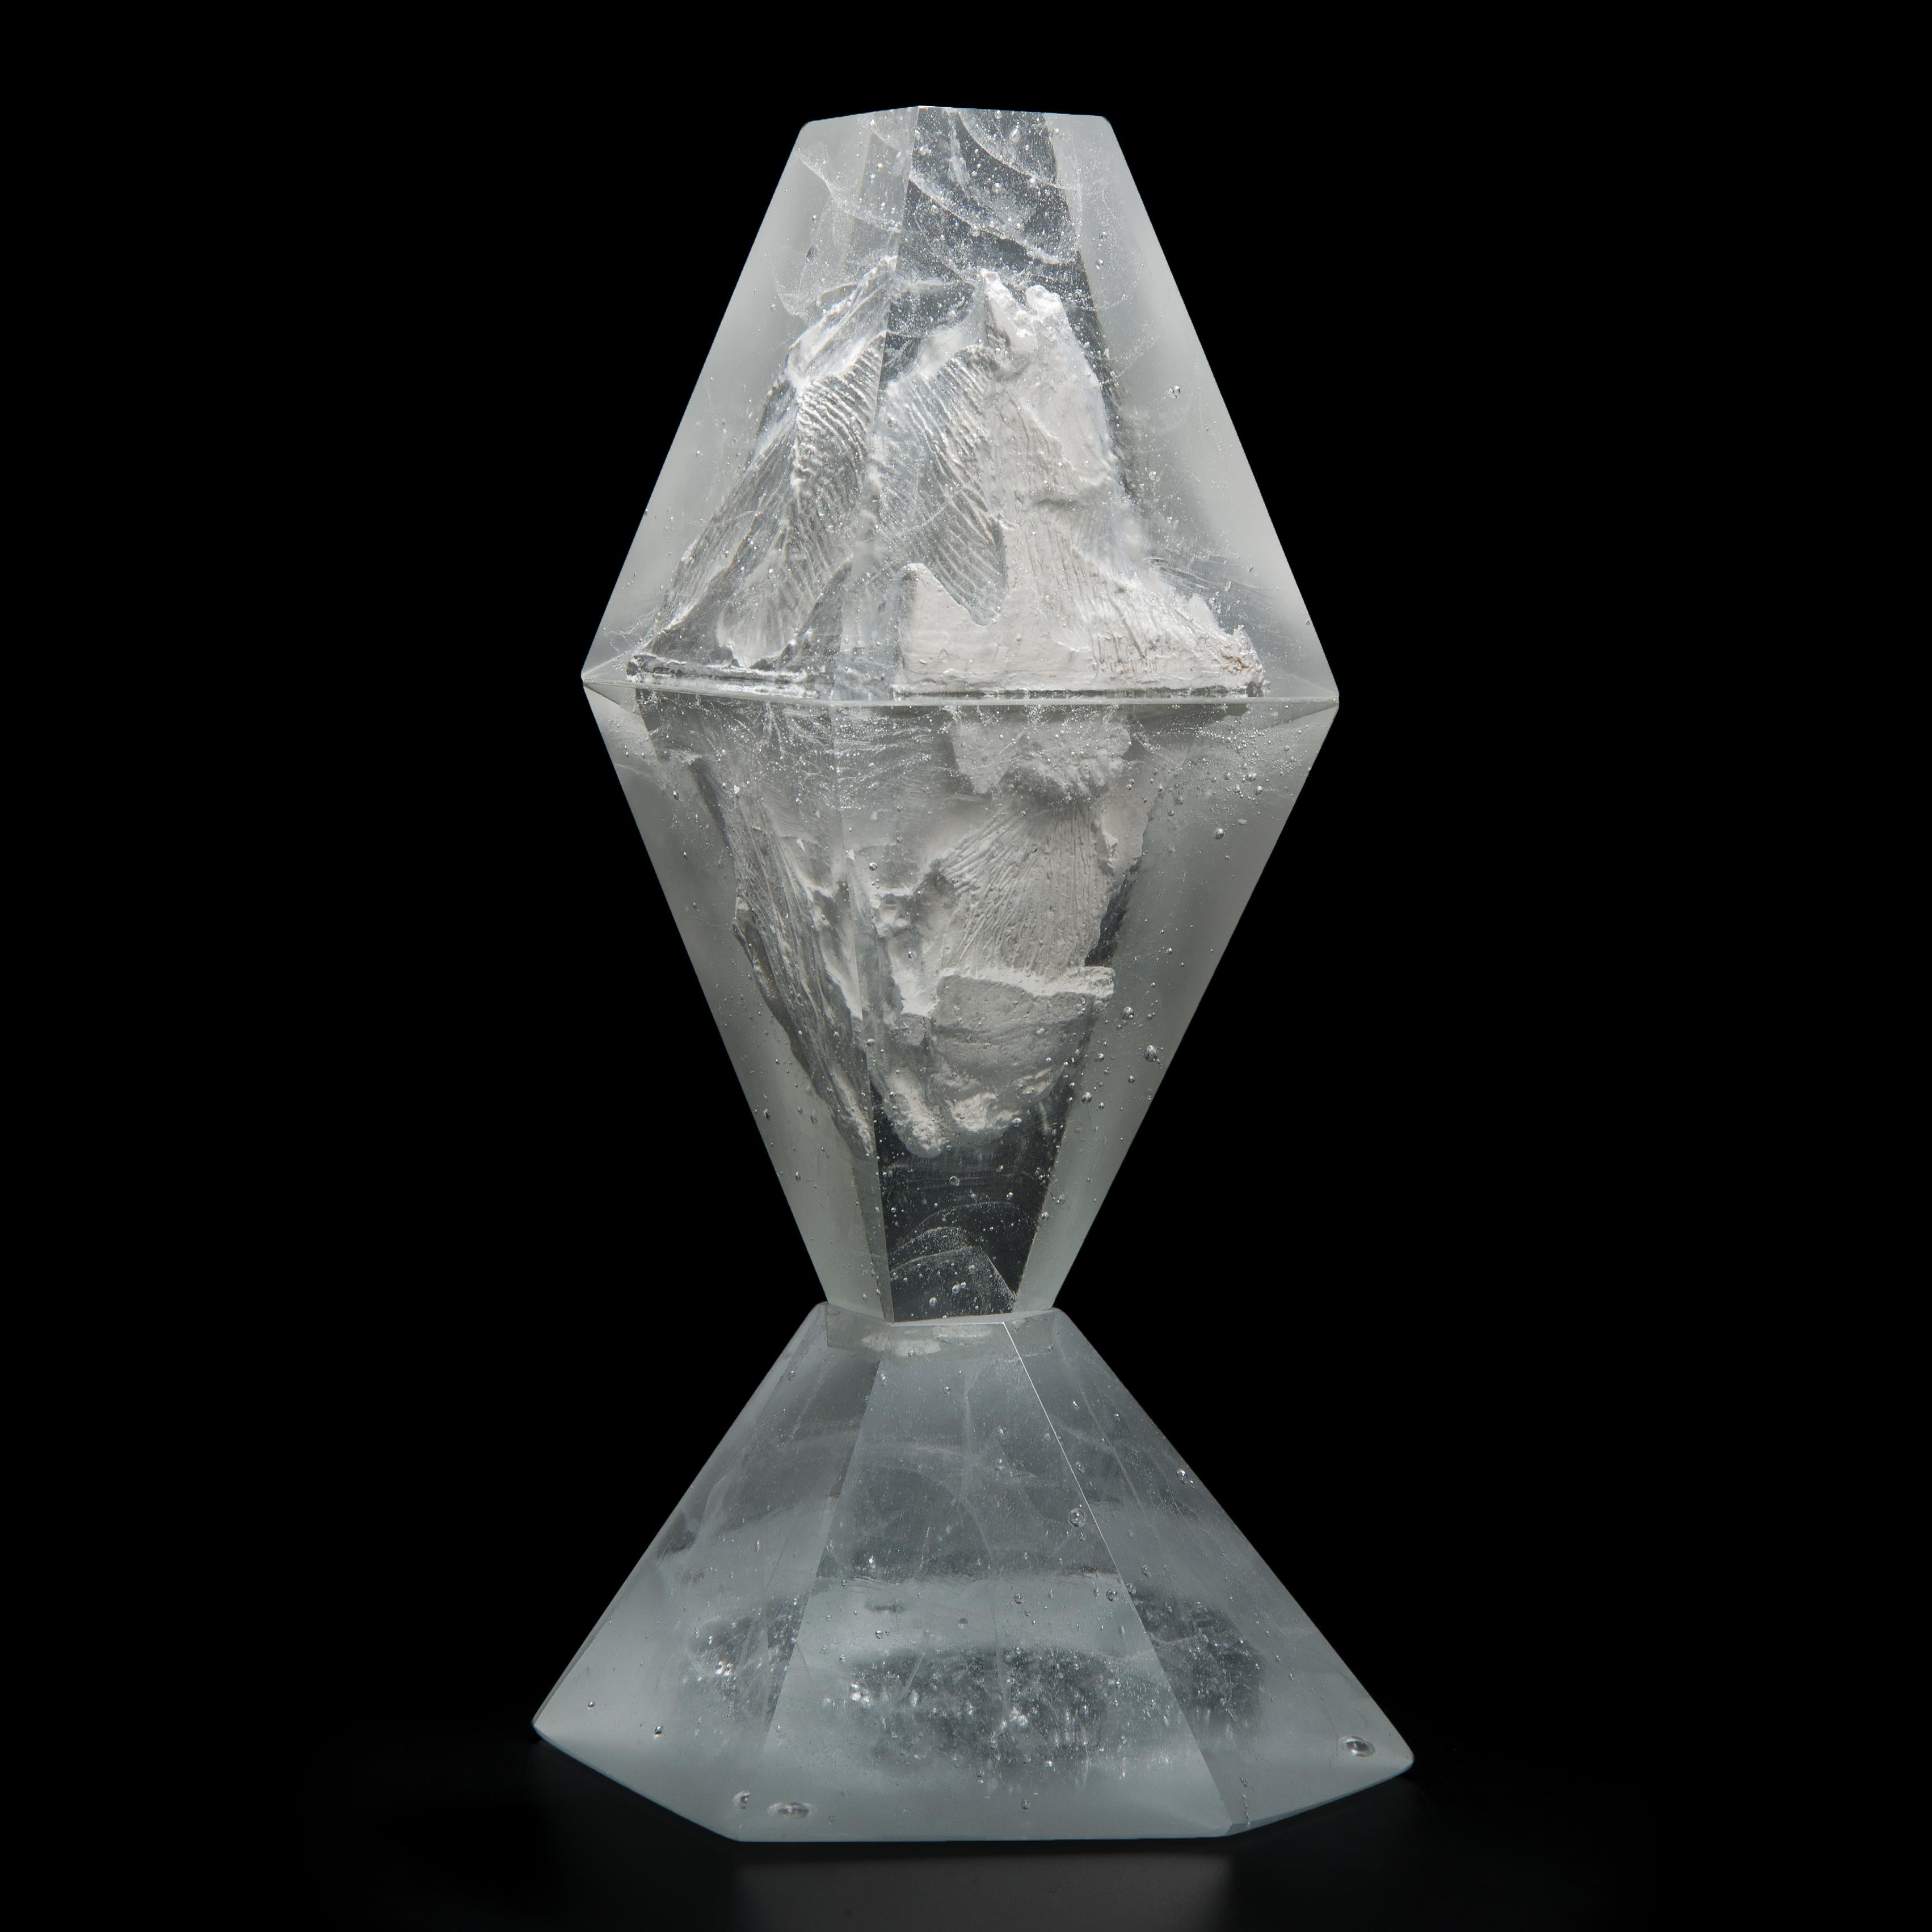 Unique Frost, is a clear cast glass sculpture by the Norwegian artist Lene Tangen. Captured in the centre of this piece, suggestive of an iceberg, is an inner core of plaster. The glass surrounding this creates a magical, glistening effect against